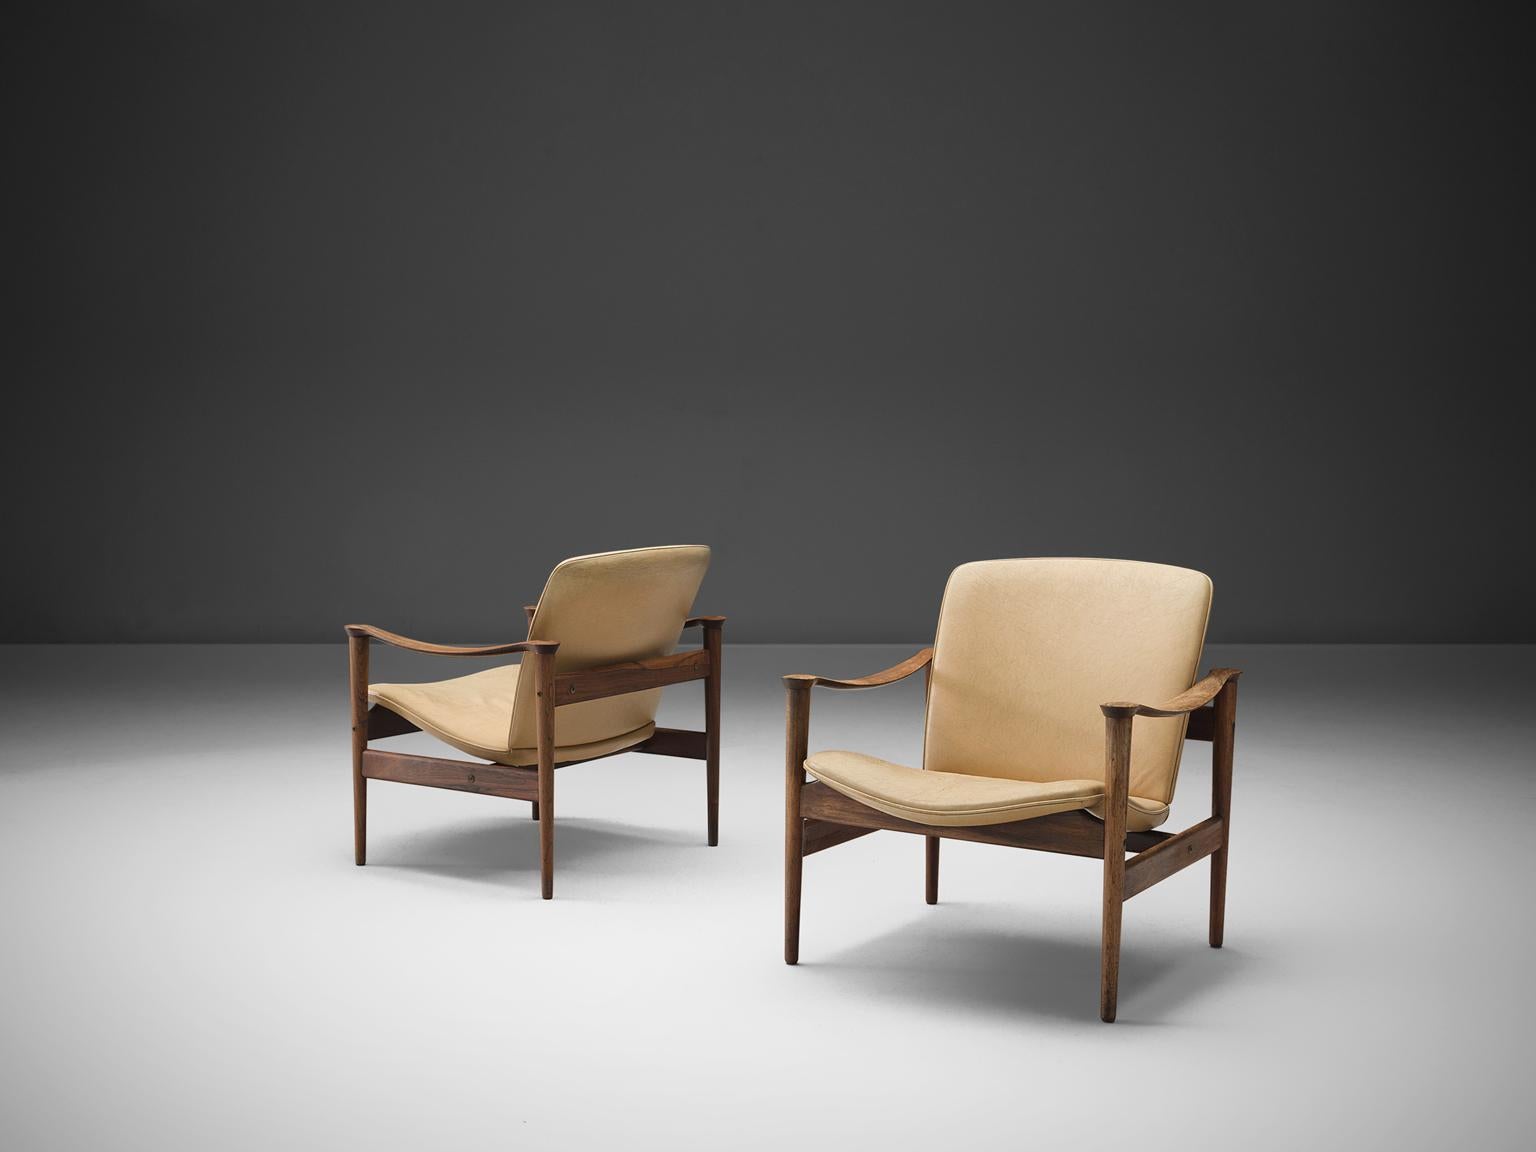 Fredrik A. Kayser for Vatne Lenestolfabrikk, armchairs model 711, rosewood and white to beige leather, Norway, 1960.

These armchairs are designed by Frederik A. Kayser and executed by Vatne Lenestolfabrikk. The armchairs are executed in rosewood,